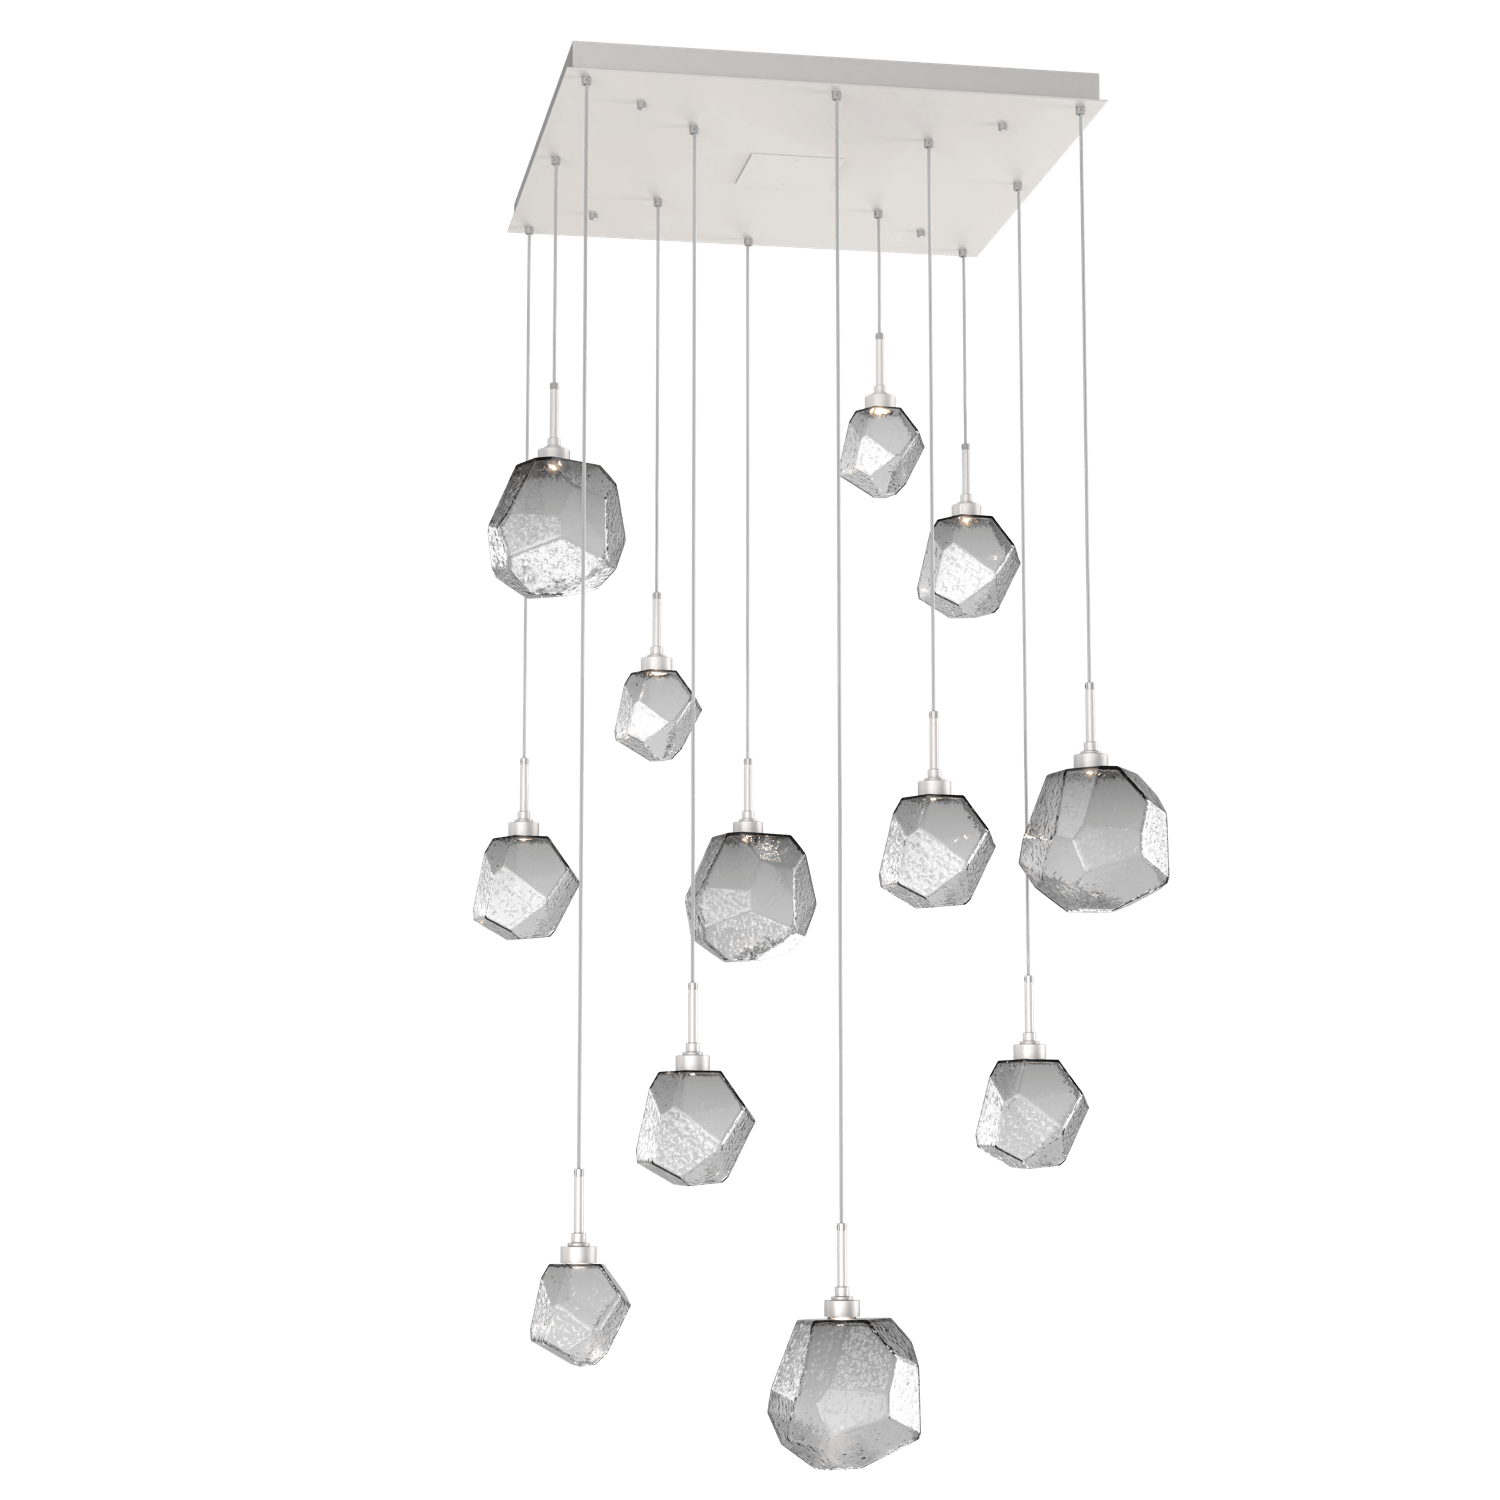 CHB0039-12-BS-S-Hammerton-Studio-Gem-12-light-square-pendant-chandelier-with-metallic-beige-silver-finish-and-smoke-blown-glass-shades-and-LED-lamping